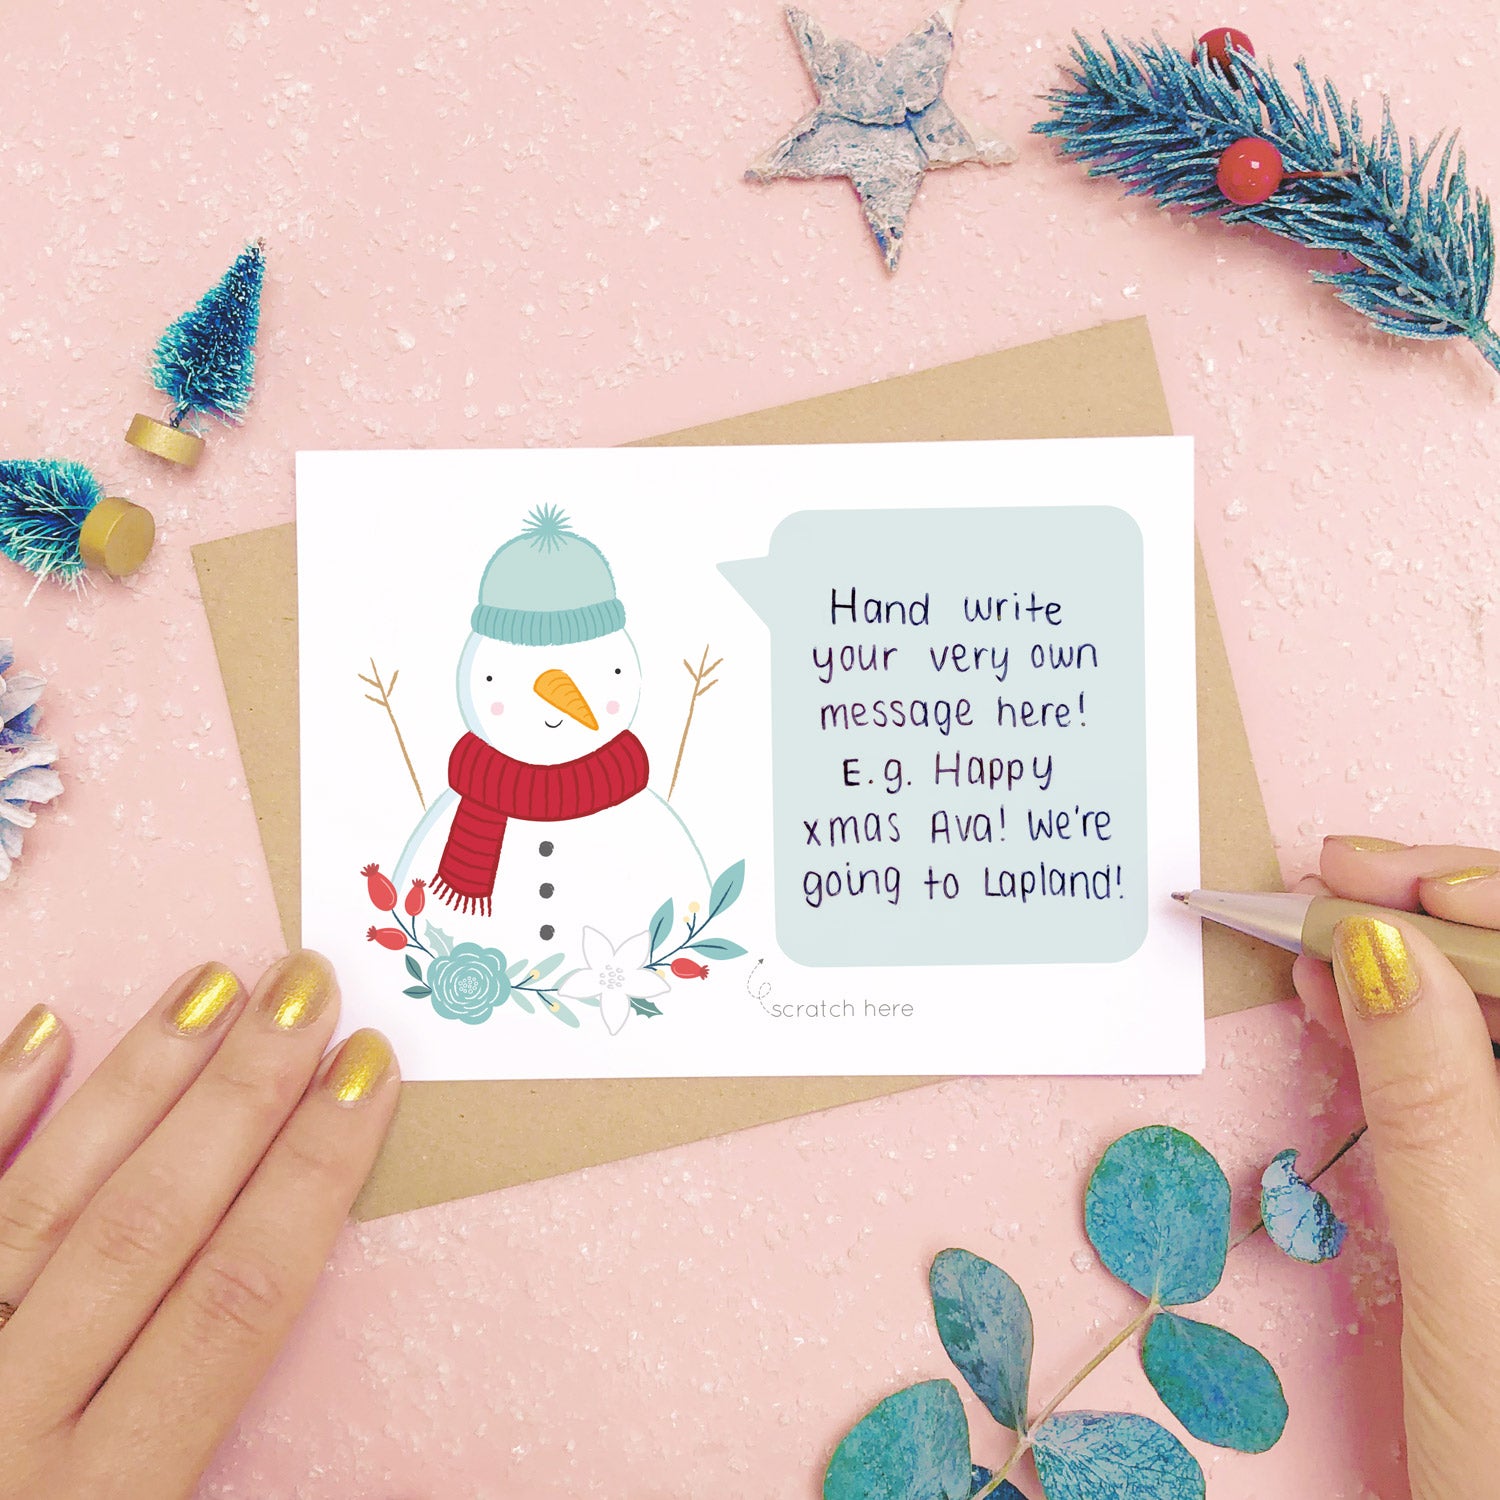 A personalised snowman scratch card showing where to write the hand written message. Shot on a pink background with grey and green festive props.